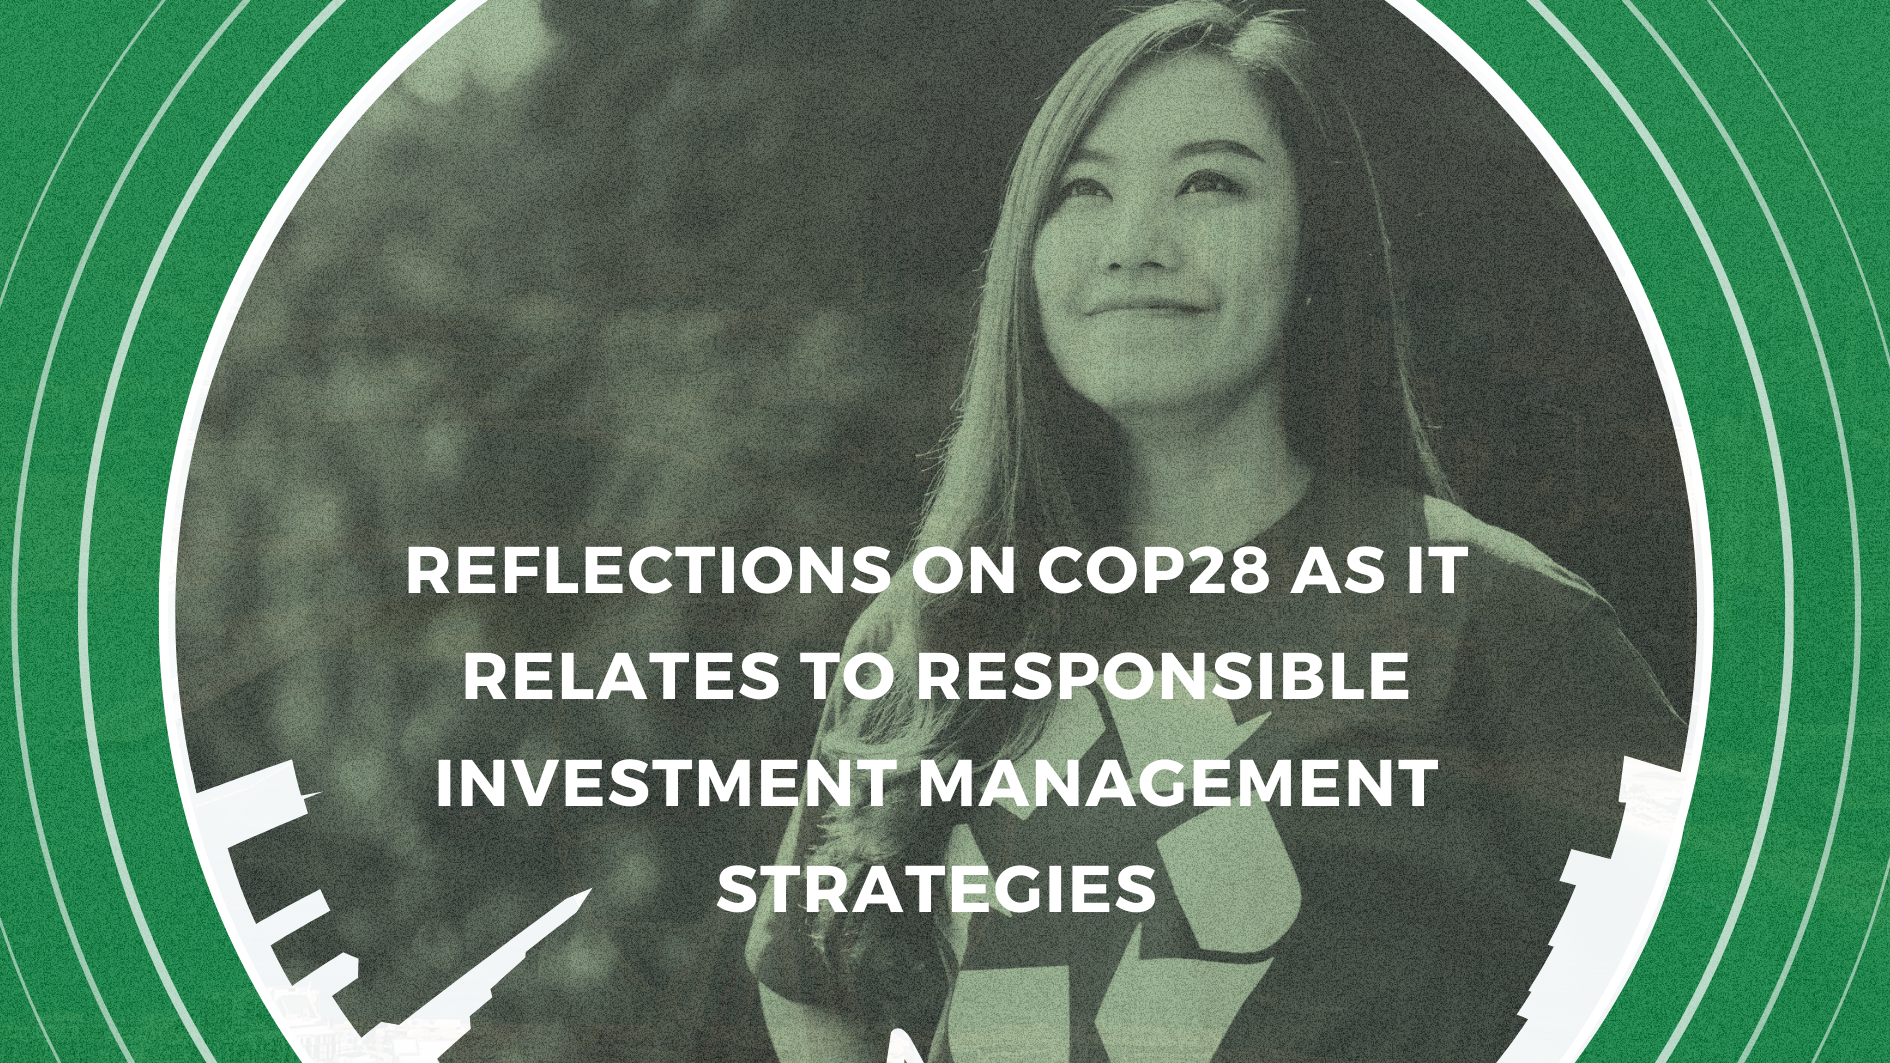 article/Evergreen Consultants/Reflections_on_Cop28_as_it_relates_to_Responsible_Investme_27vY0xa.png